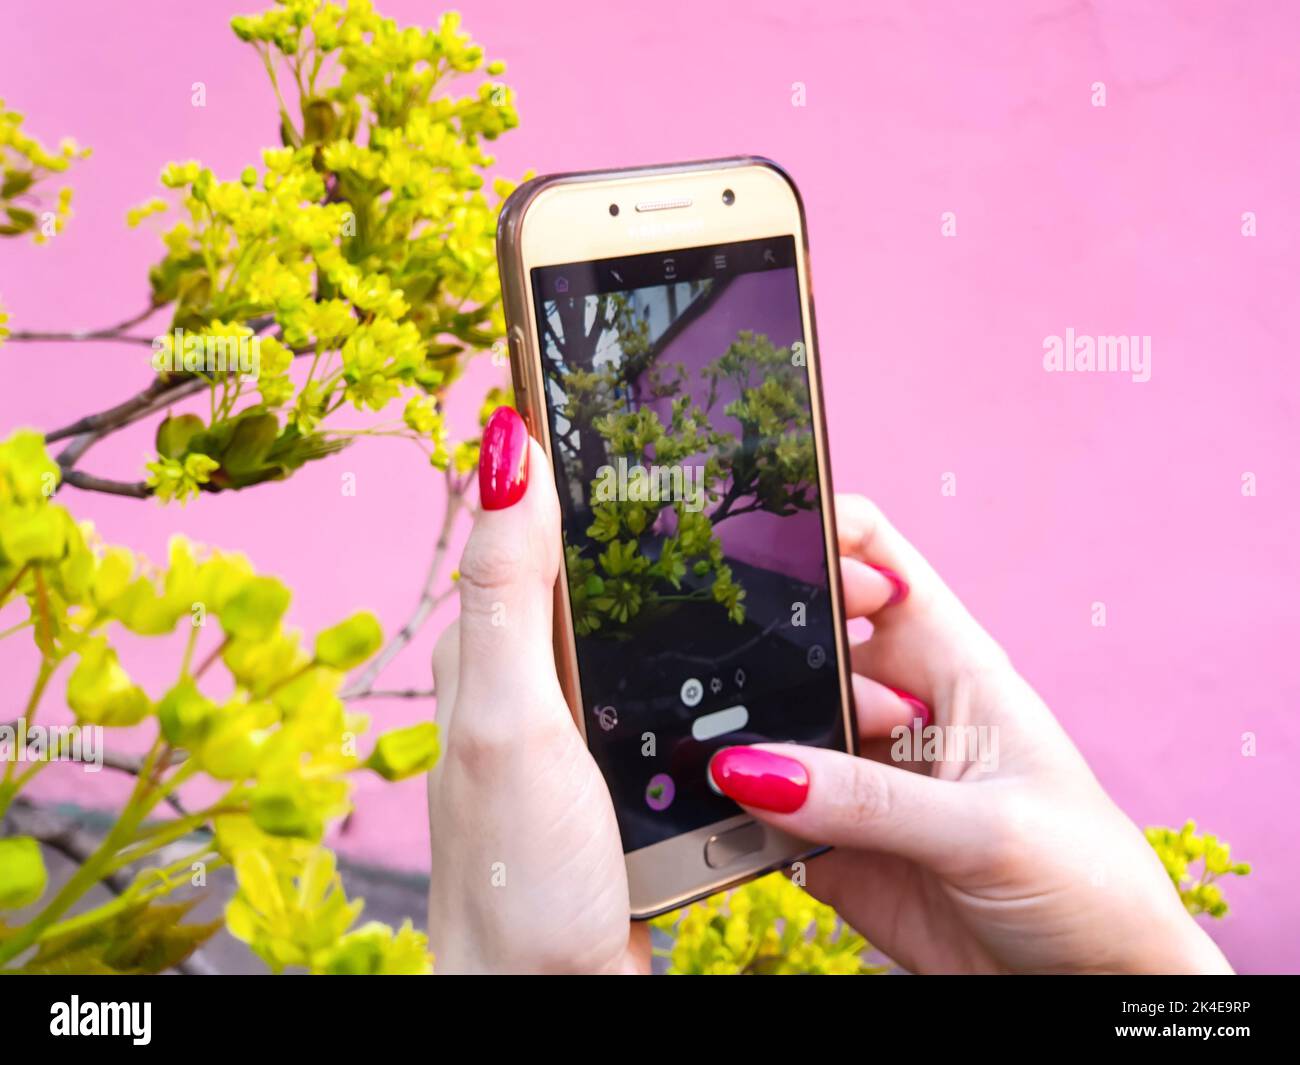 Saint Petersburg, Russia - 5.25.2021: Female hands with red nails are holding iphone Samsung Galaxy a5 and filming tree branch on phone camera. Stock Photo